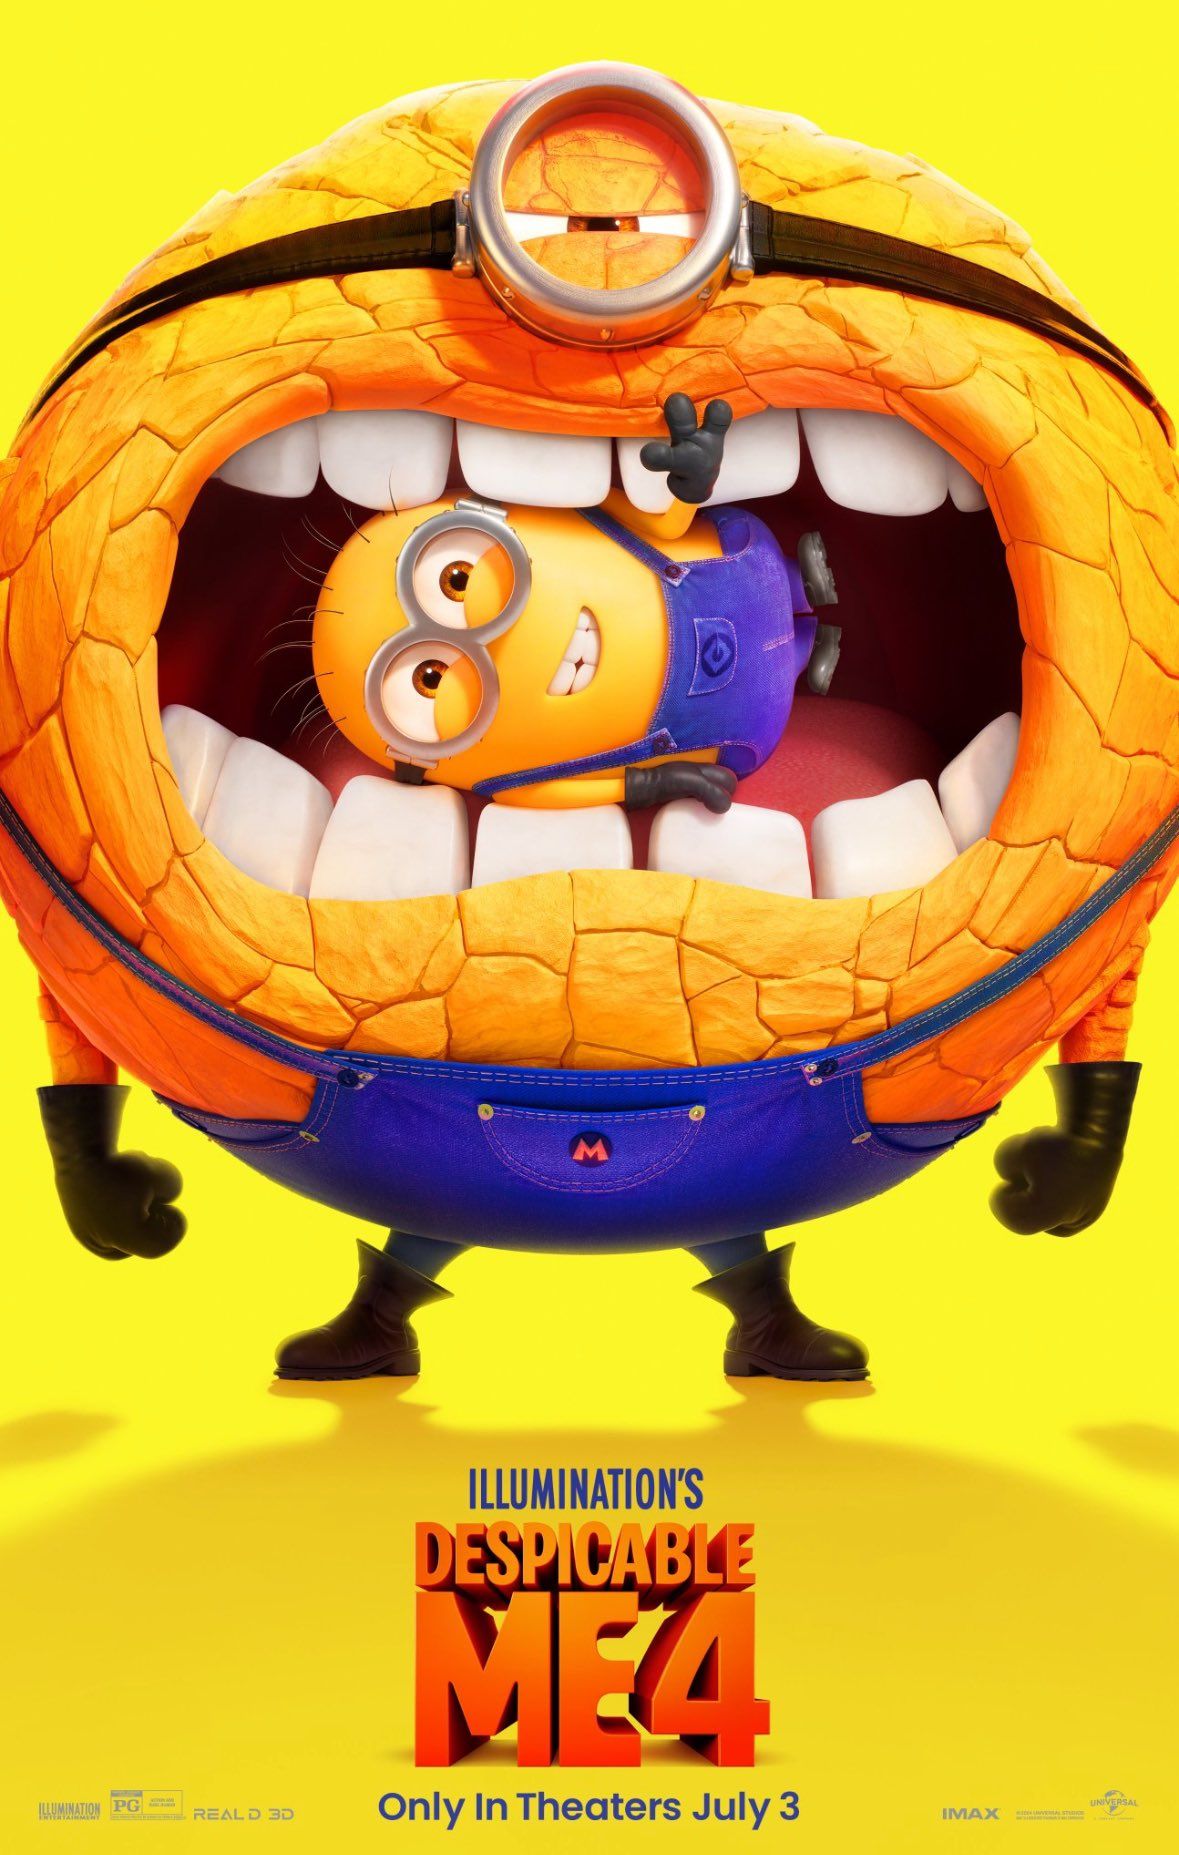 A new poster for Despicable Me 4 shows a larger, rock-like minion biting a smaller minion